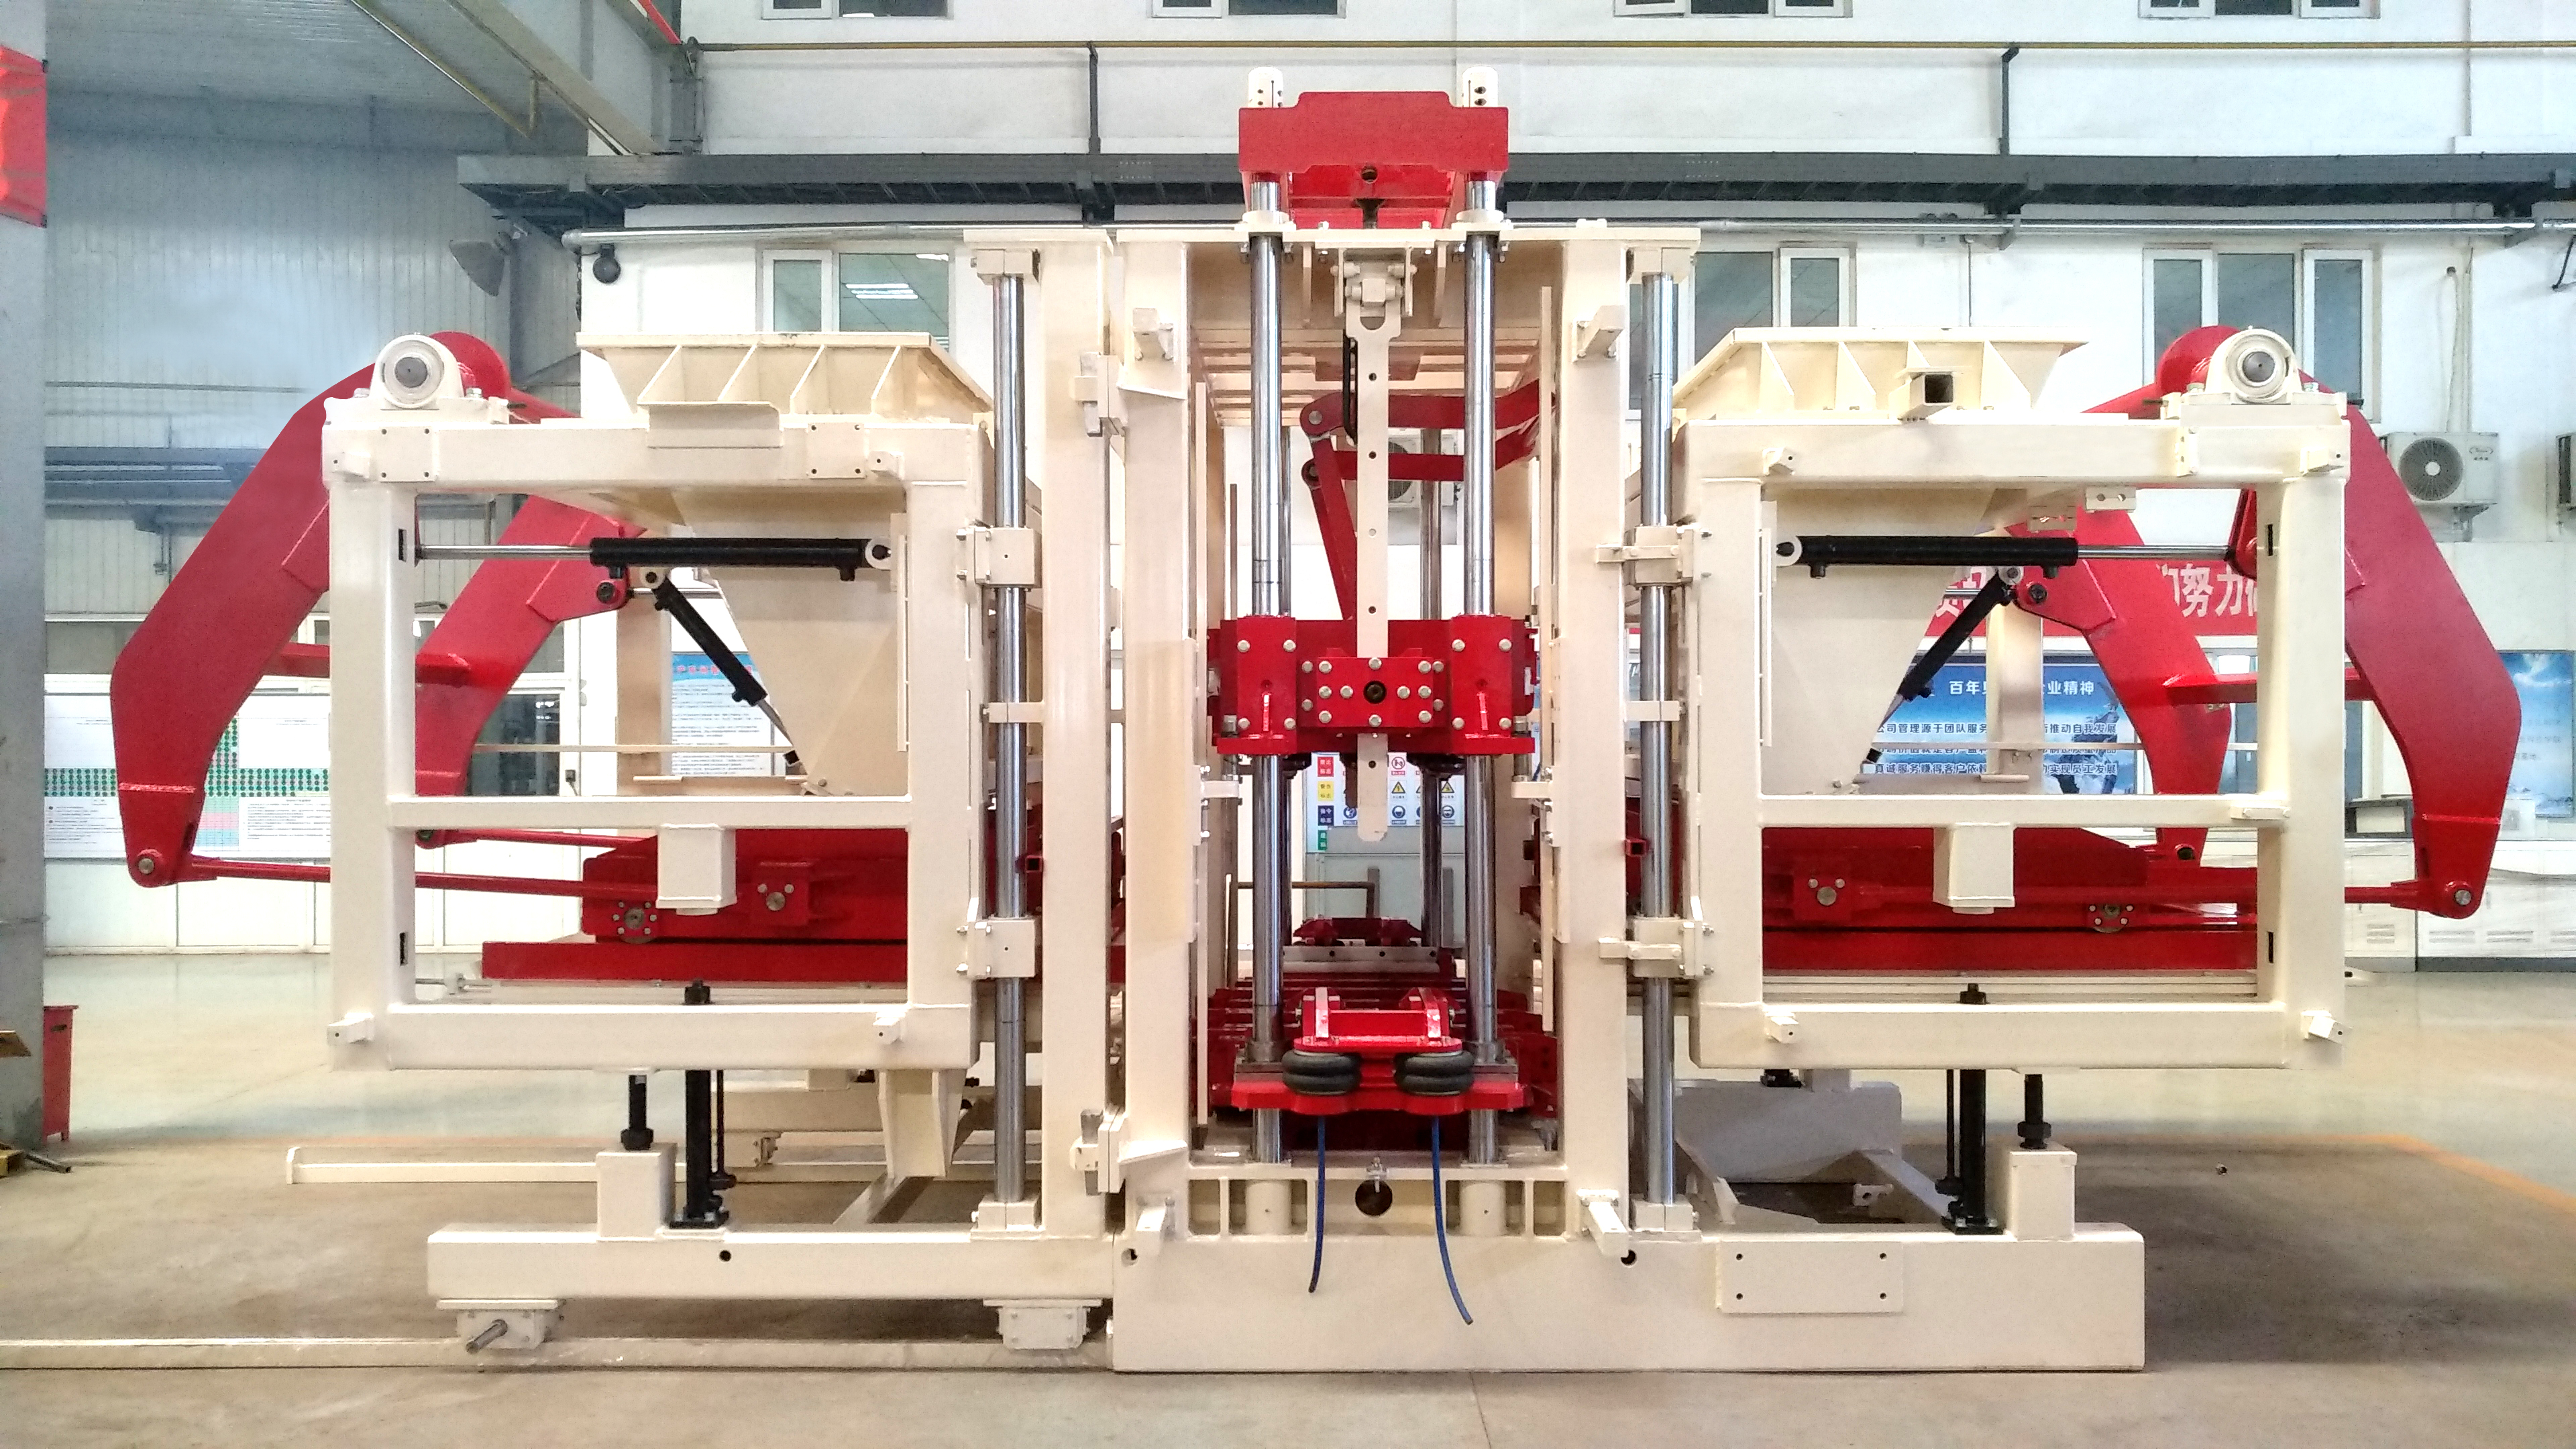 BDT-T9 Block Forming Machine （Red and white）and Production Line Equipment